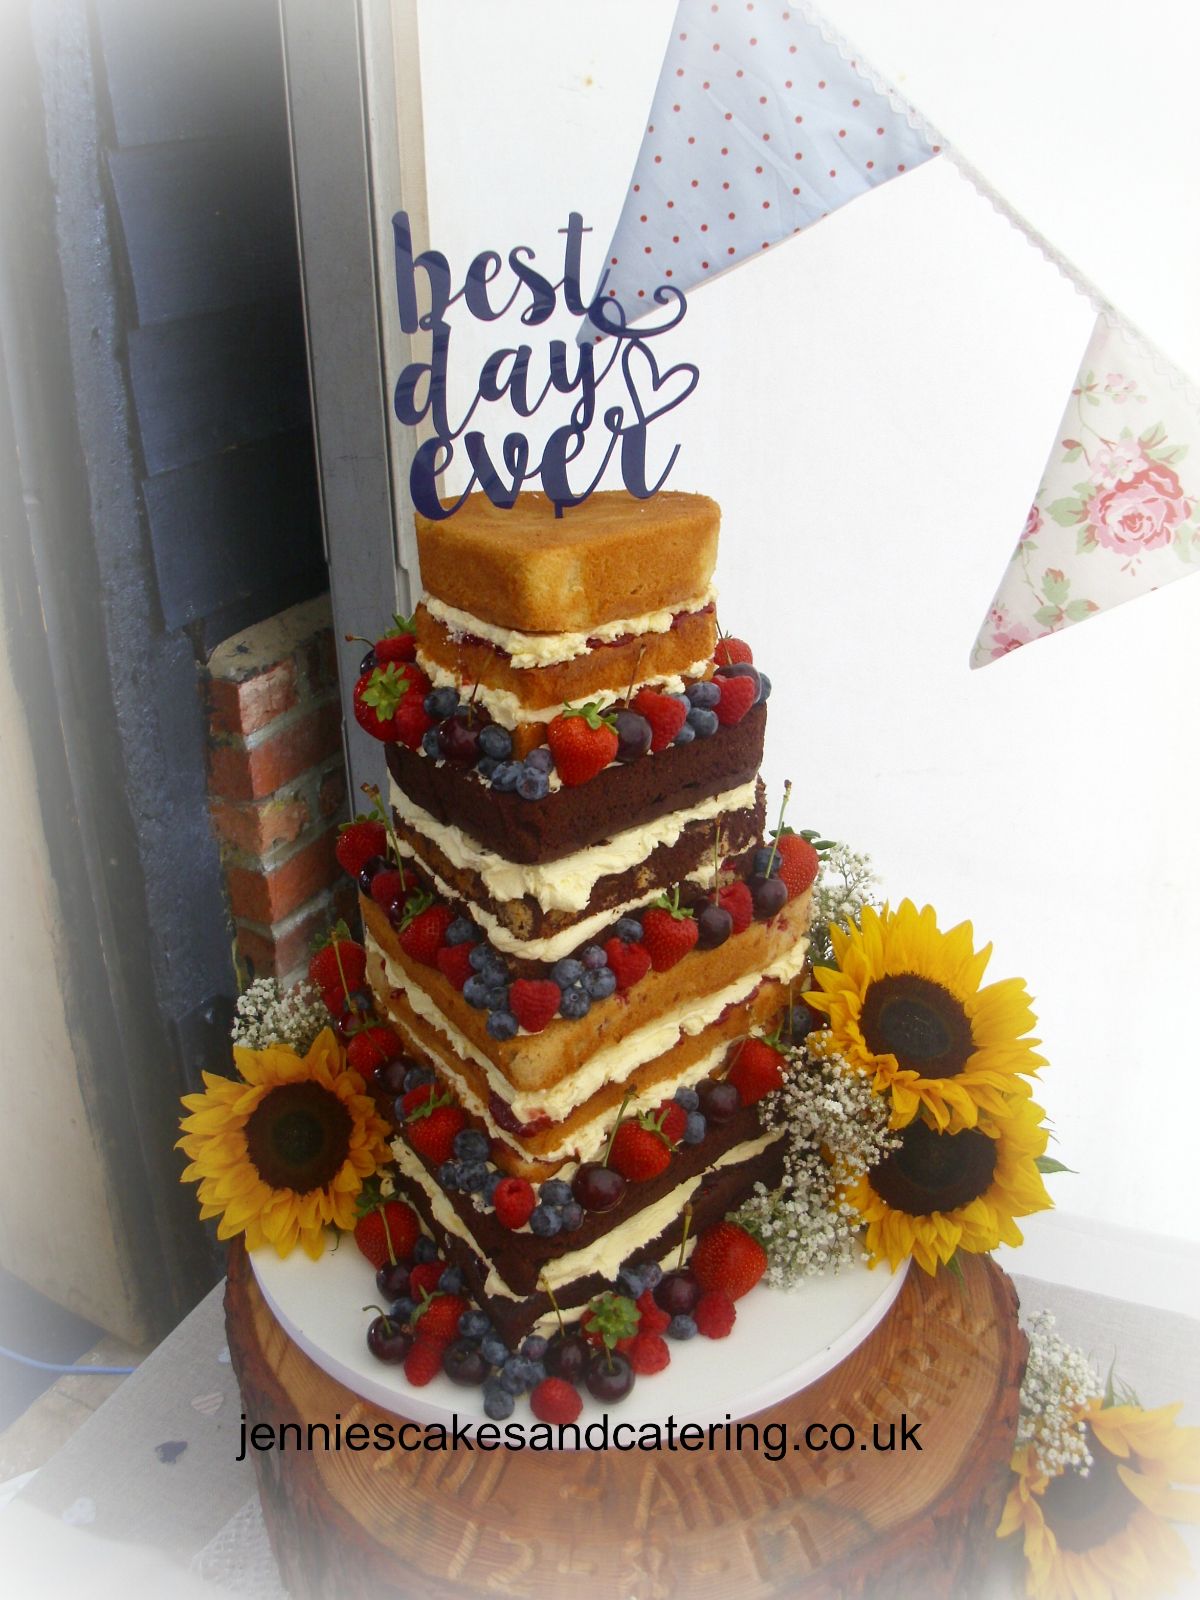 Jennie's cake's and catering-Image-90